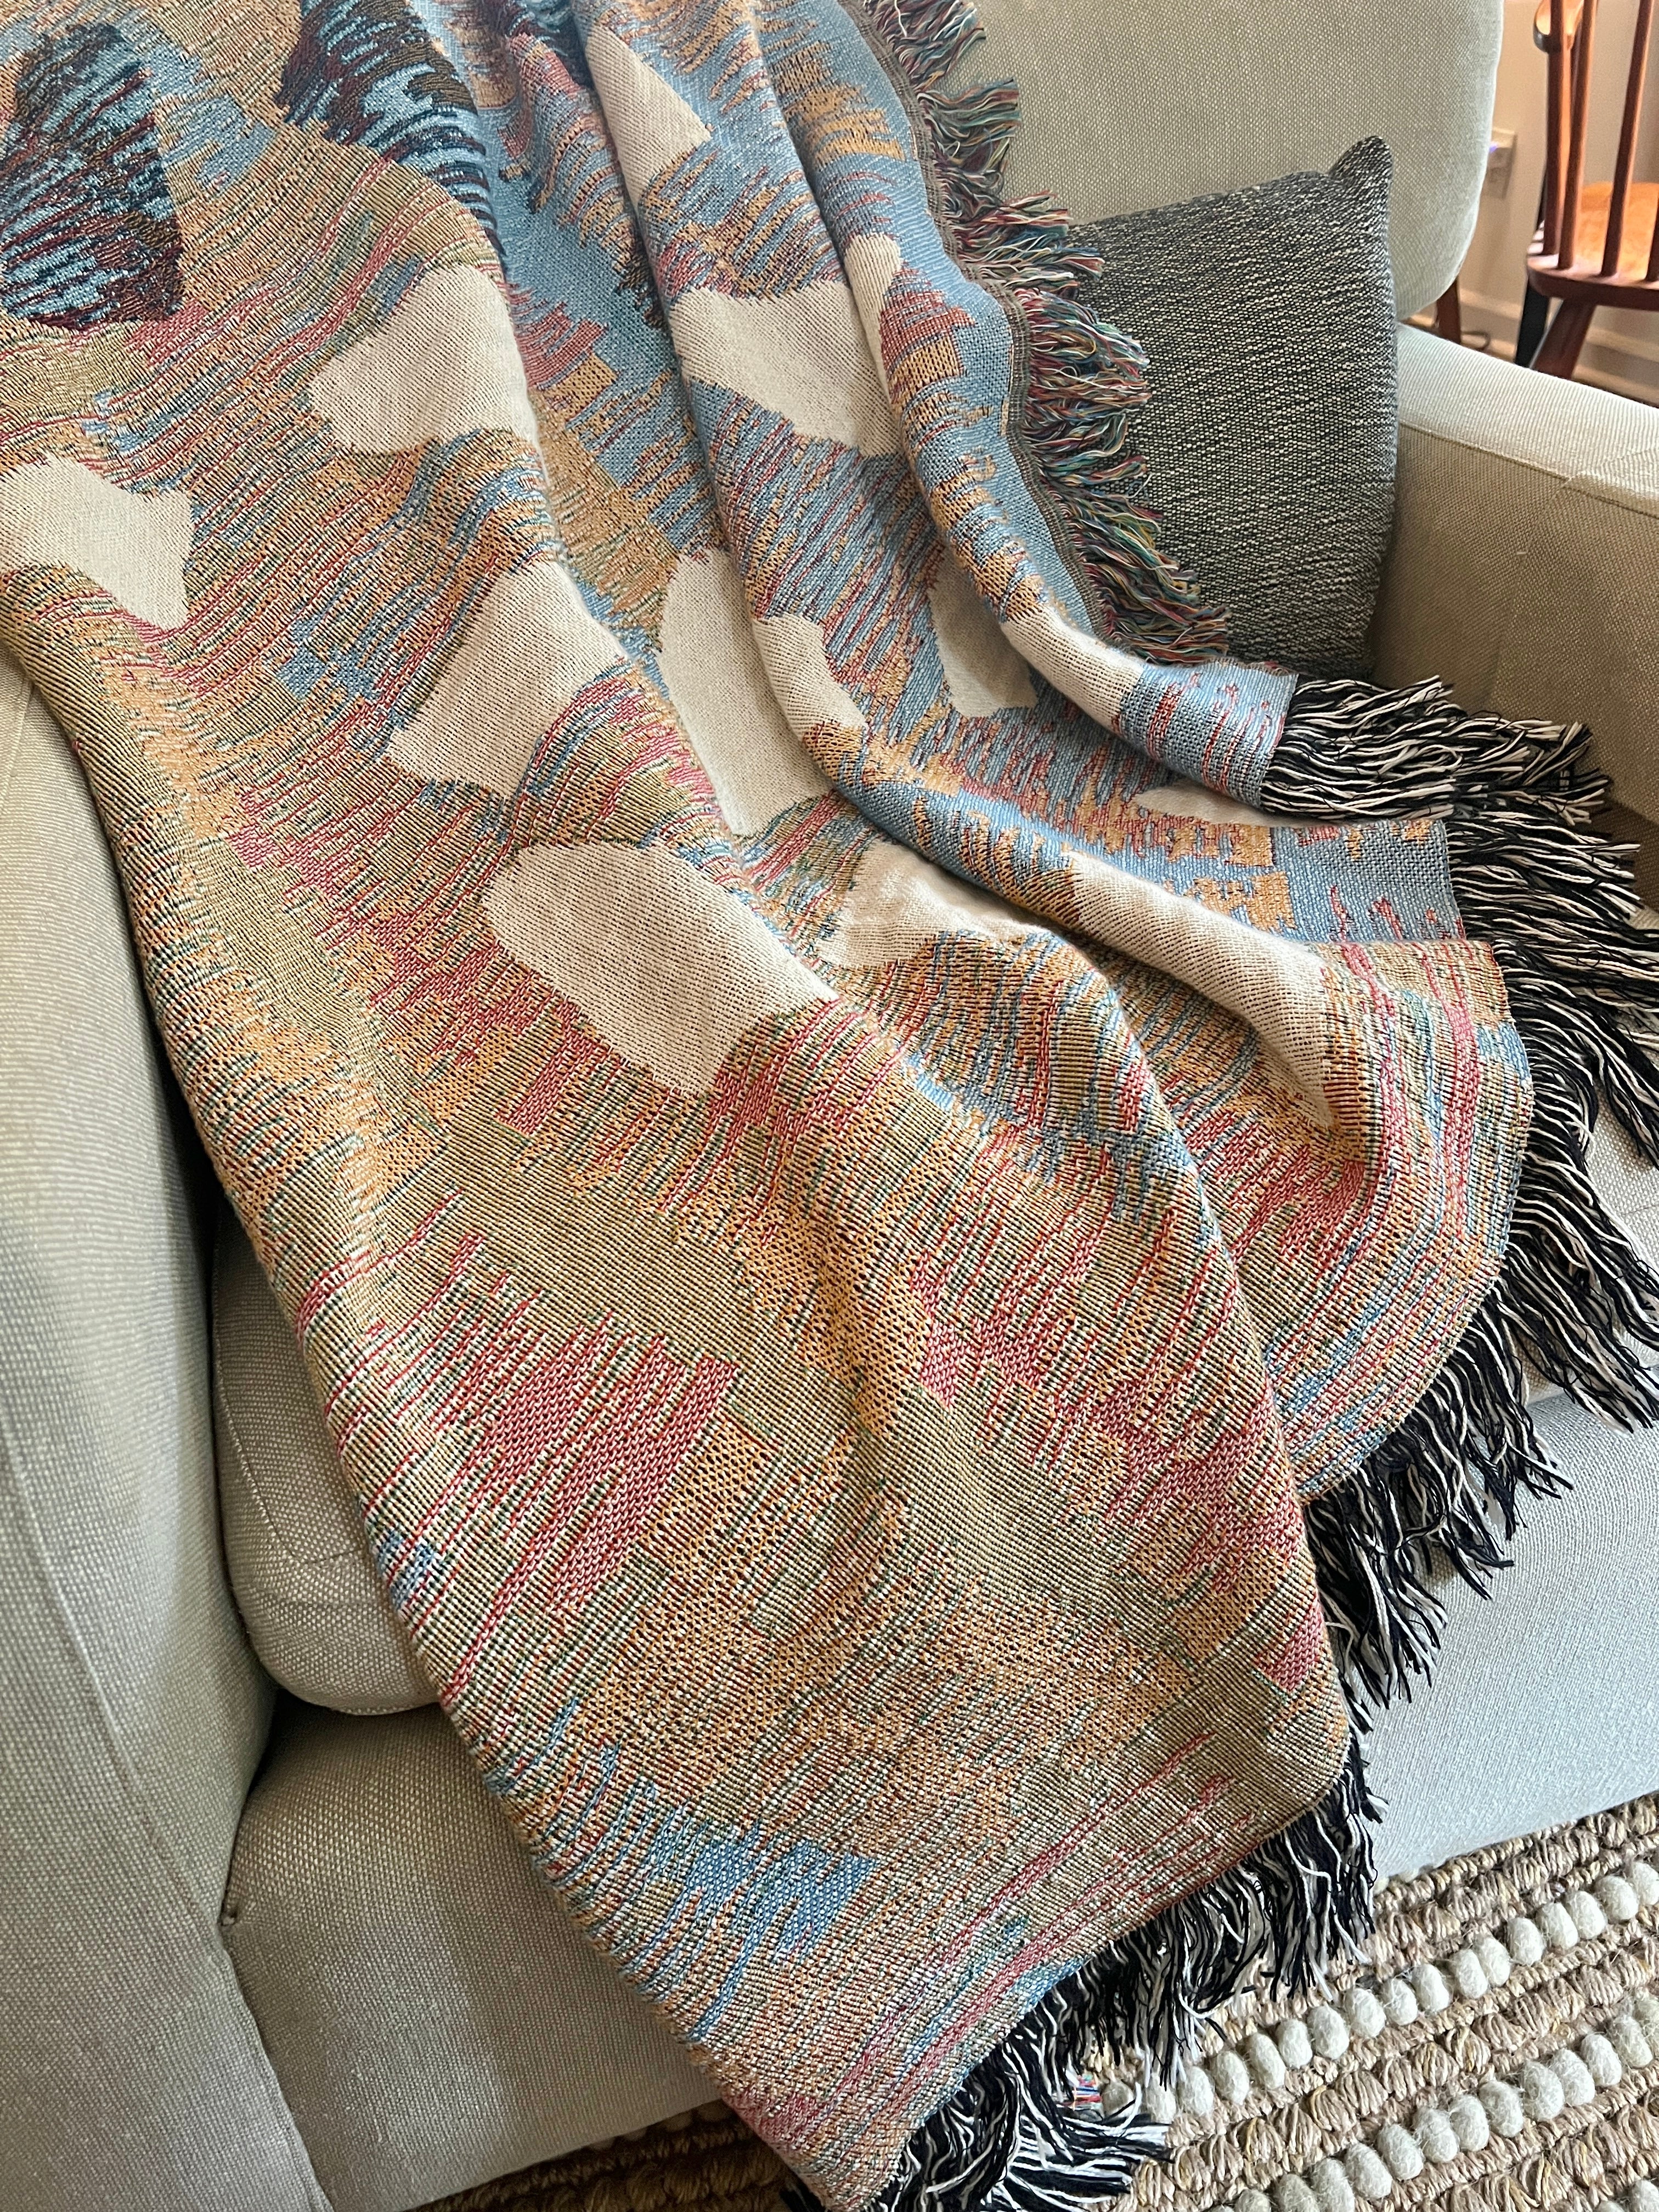 Snippet Woven Throw Blanket